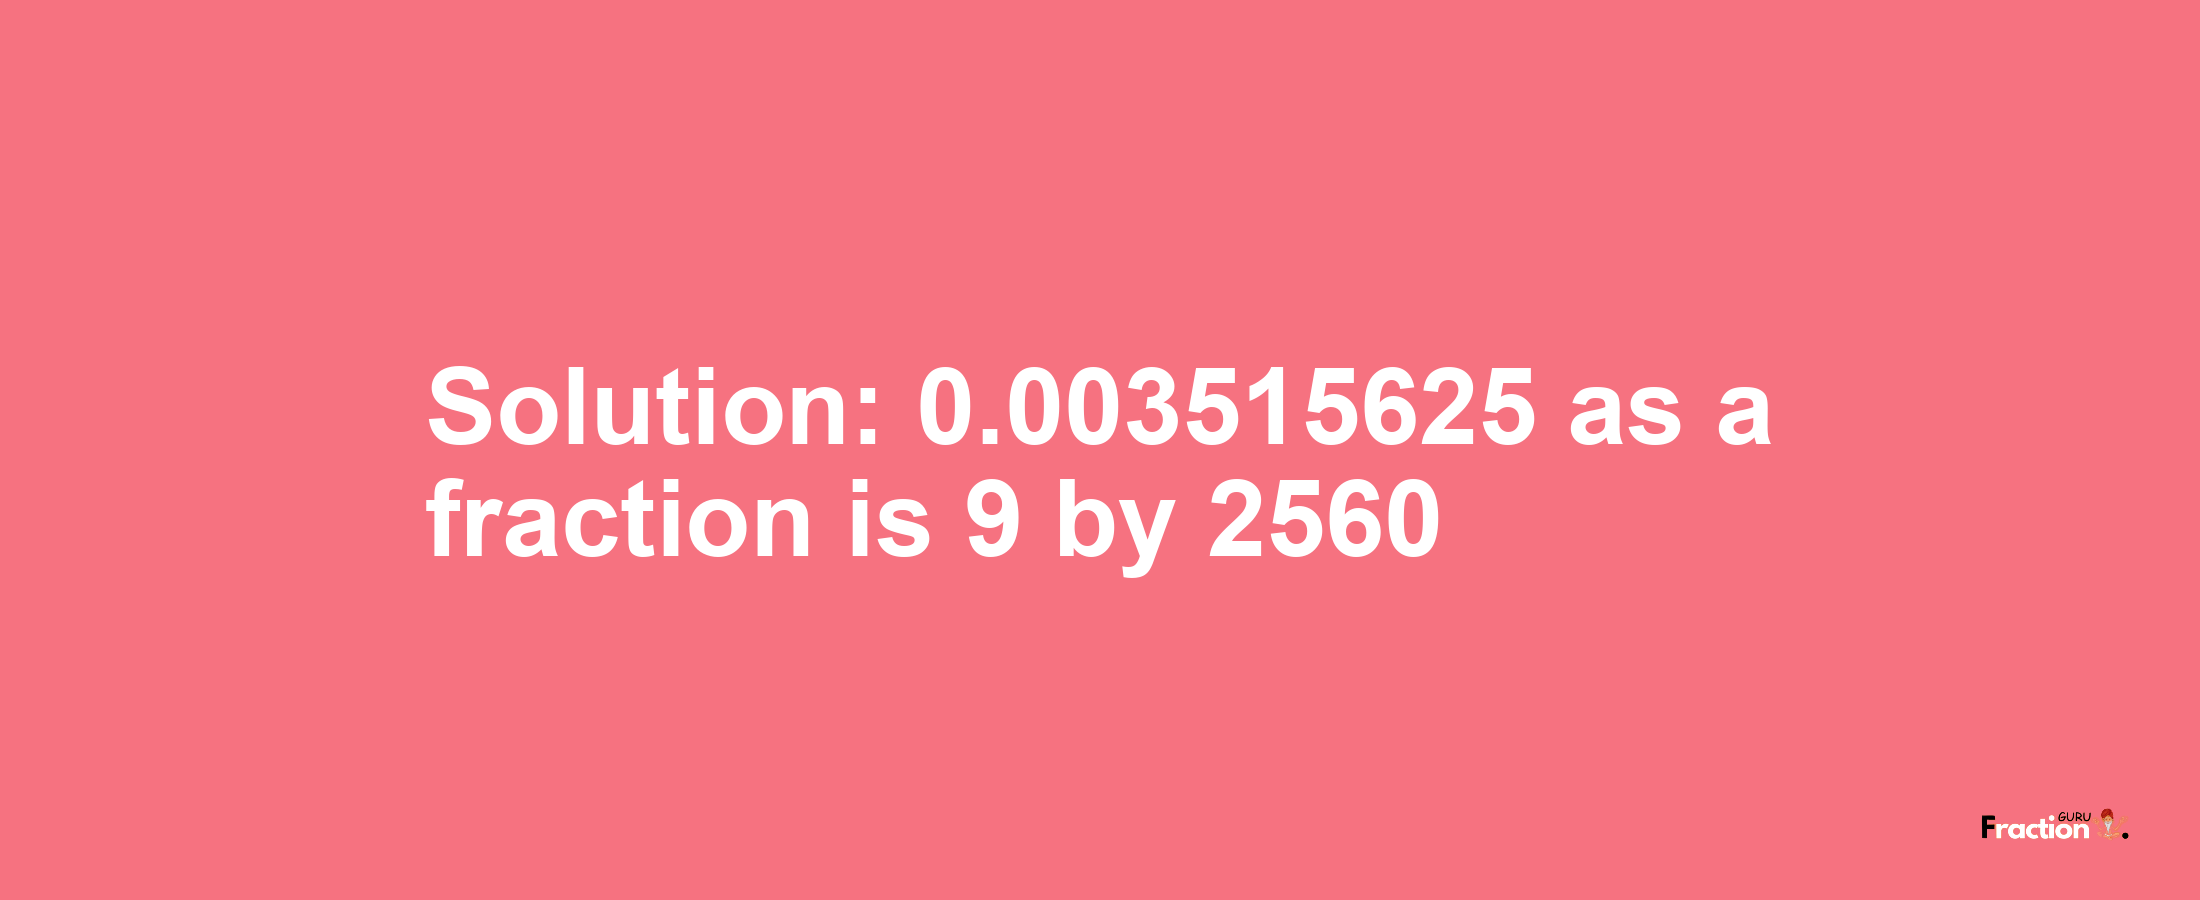 Solution:0.003515625 as a fraction is 9/2560